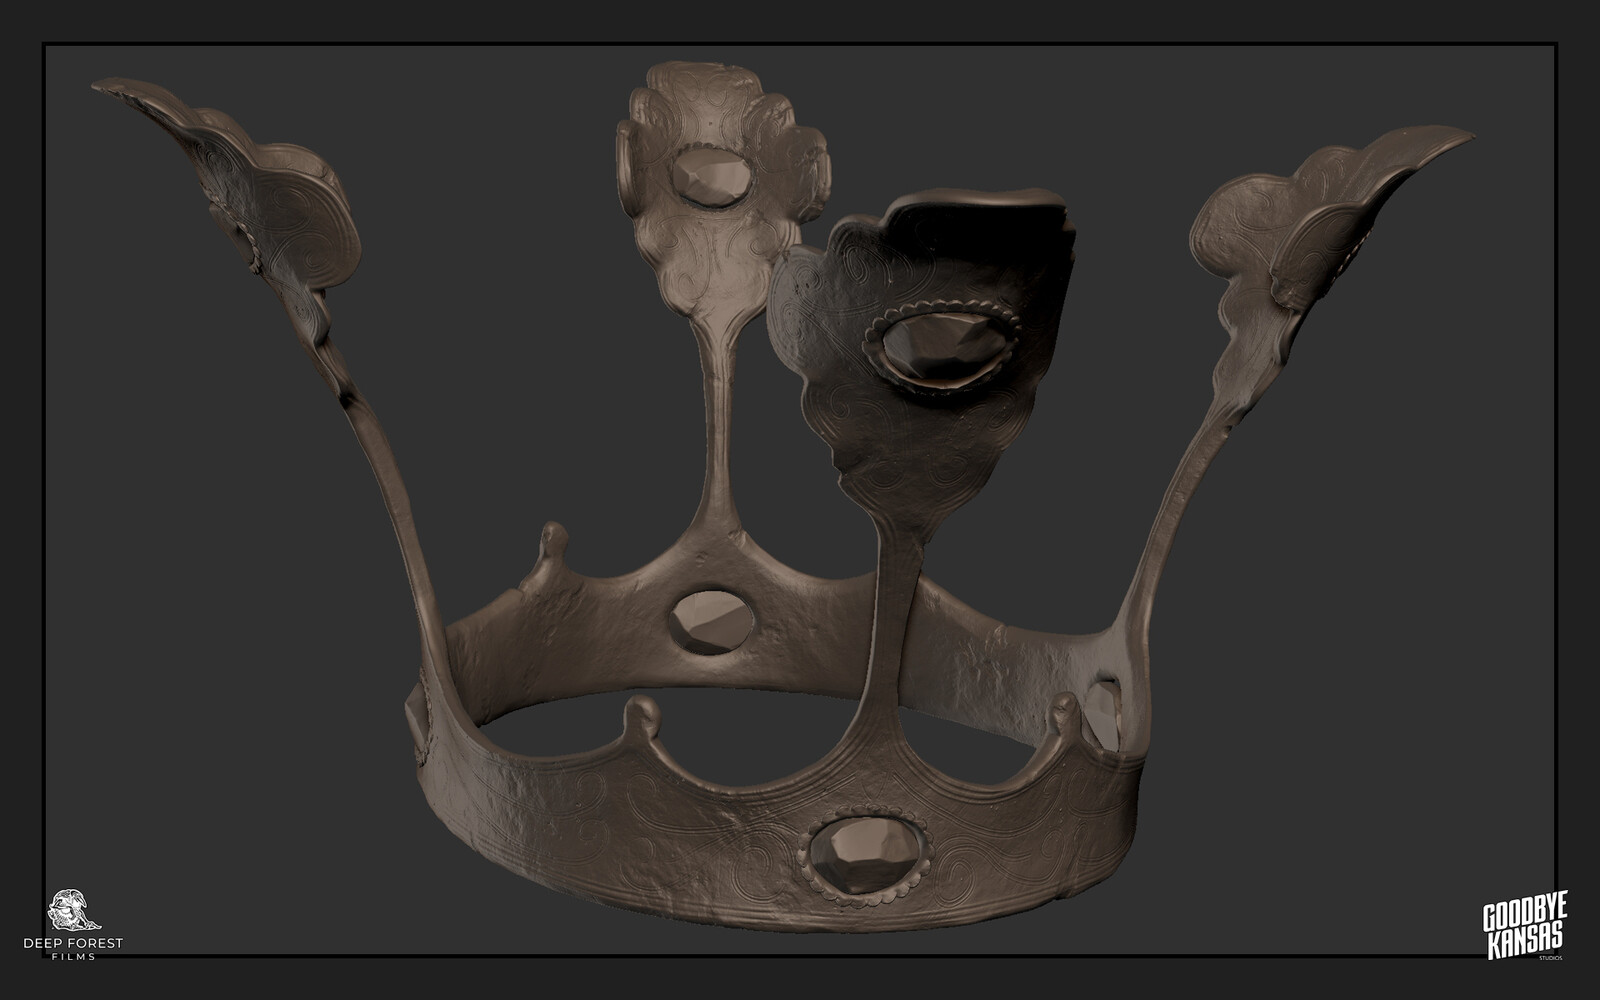 ZBrush sculpt of the princess's crown